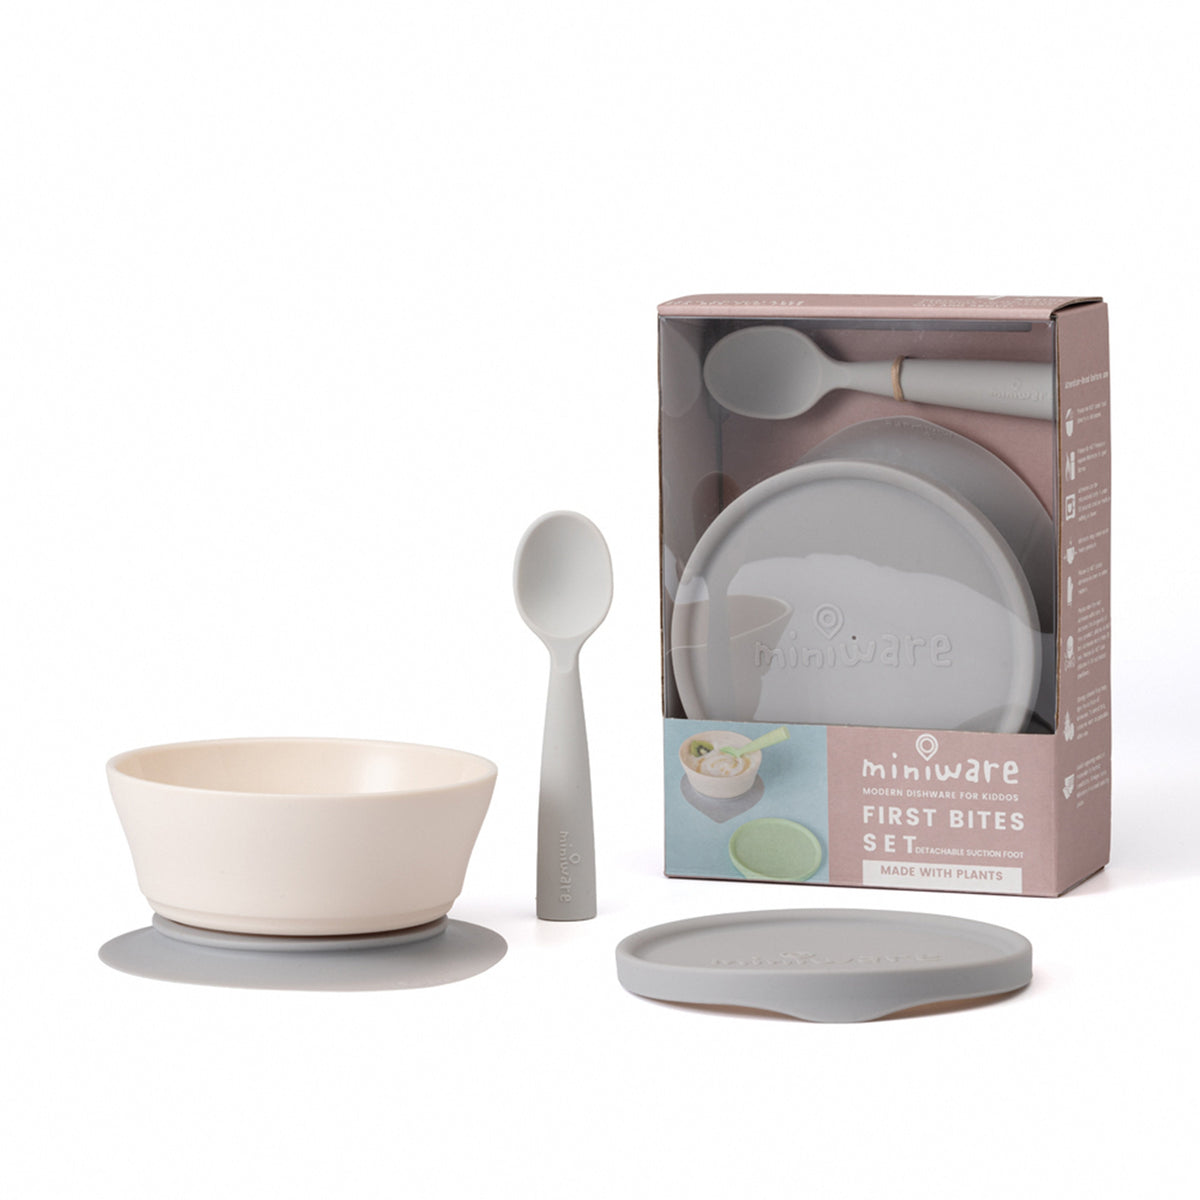 miniware-first-bite-set-pla-cereal-suction-bowl-vanilla-+-silicone-spoon-and-cover-in-cotton-grey- (1)